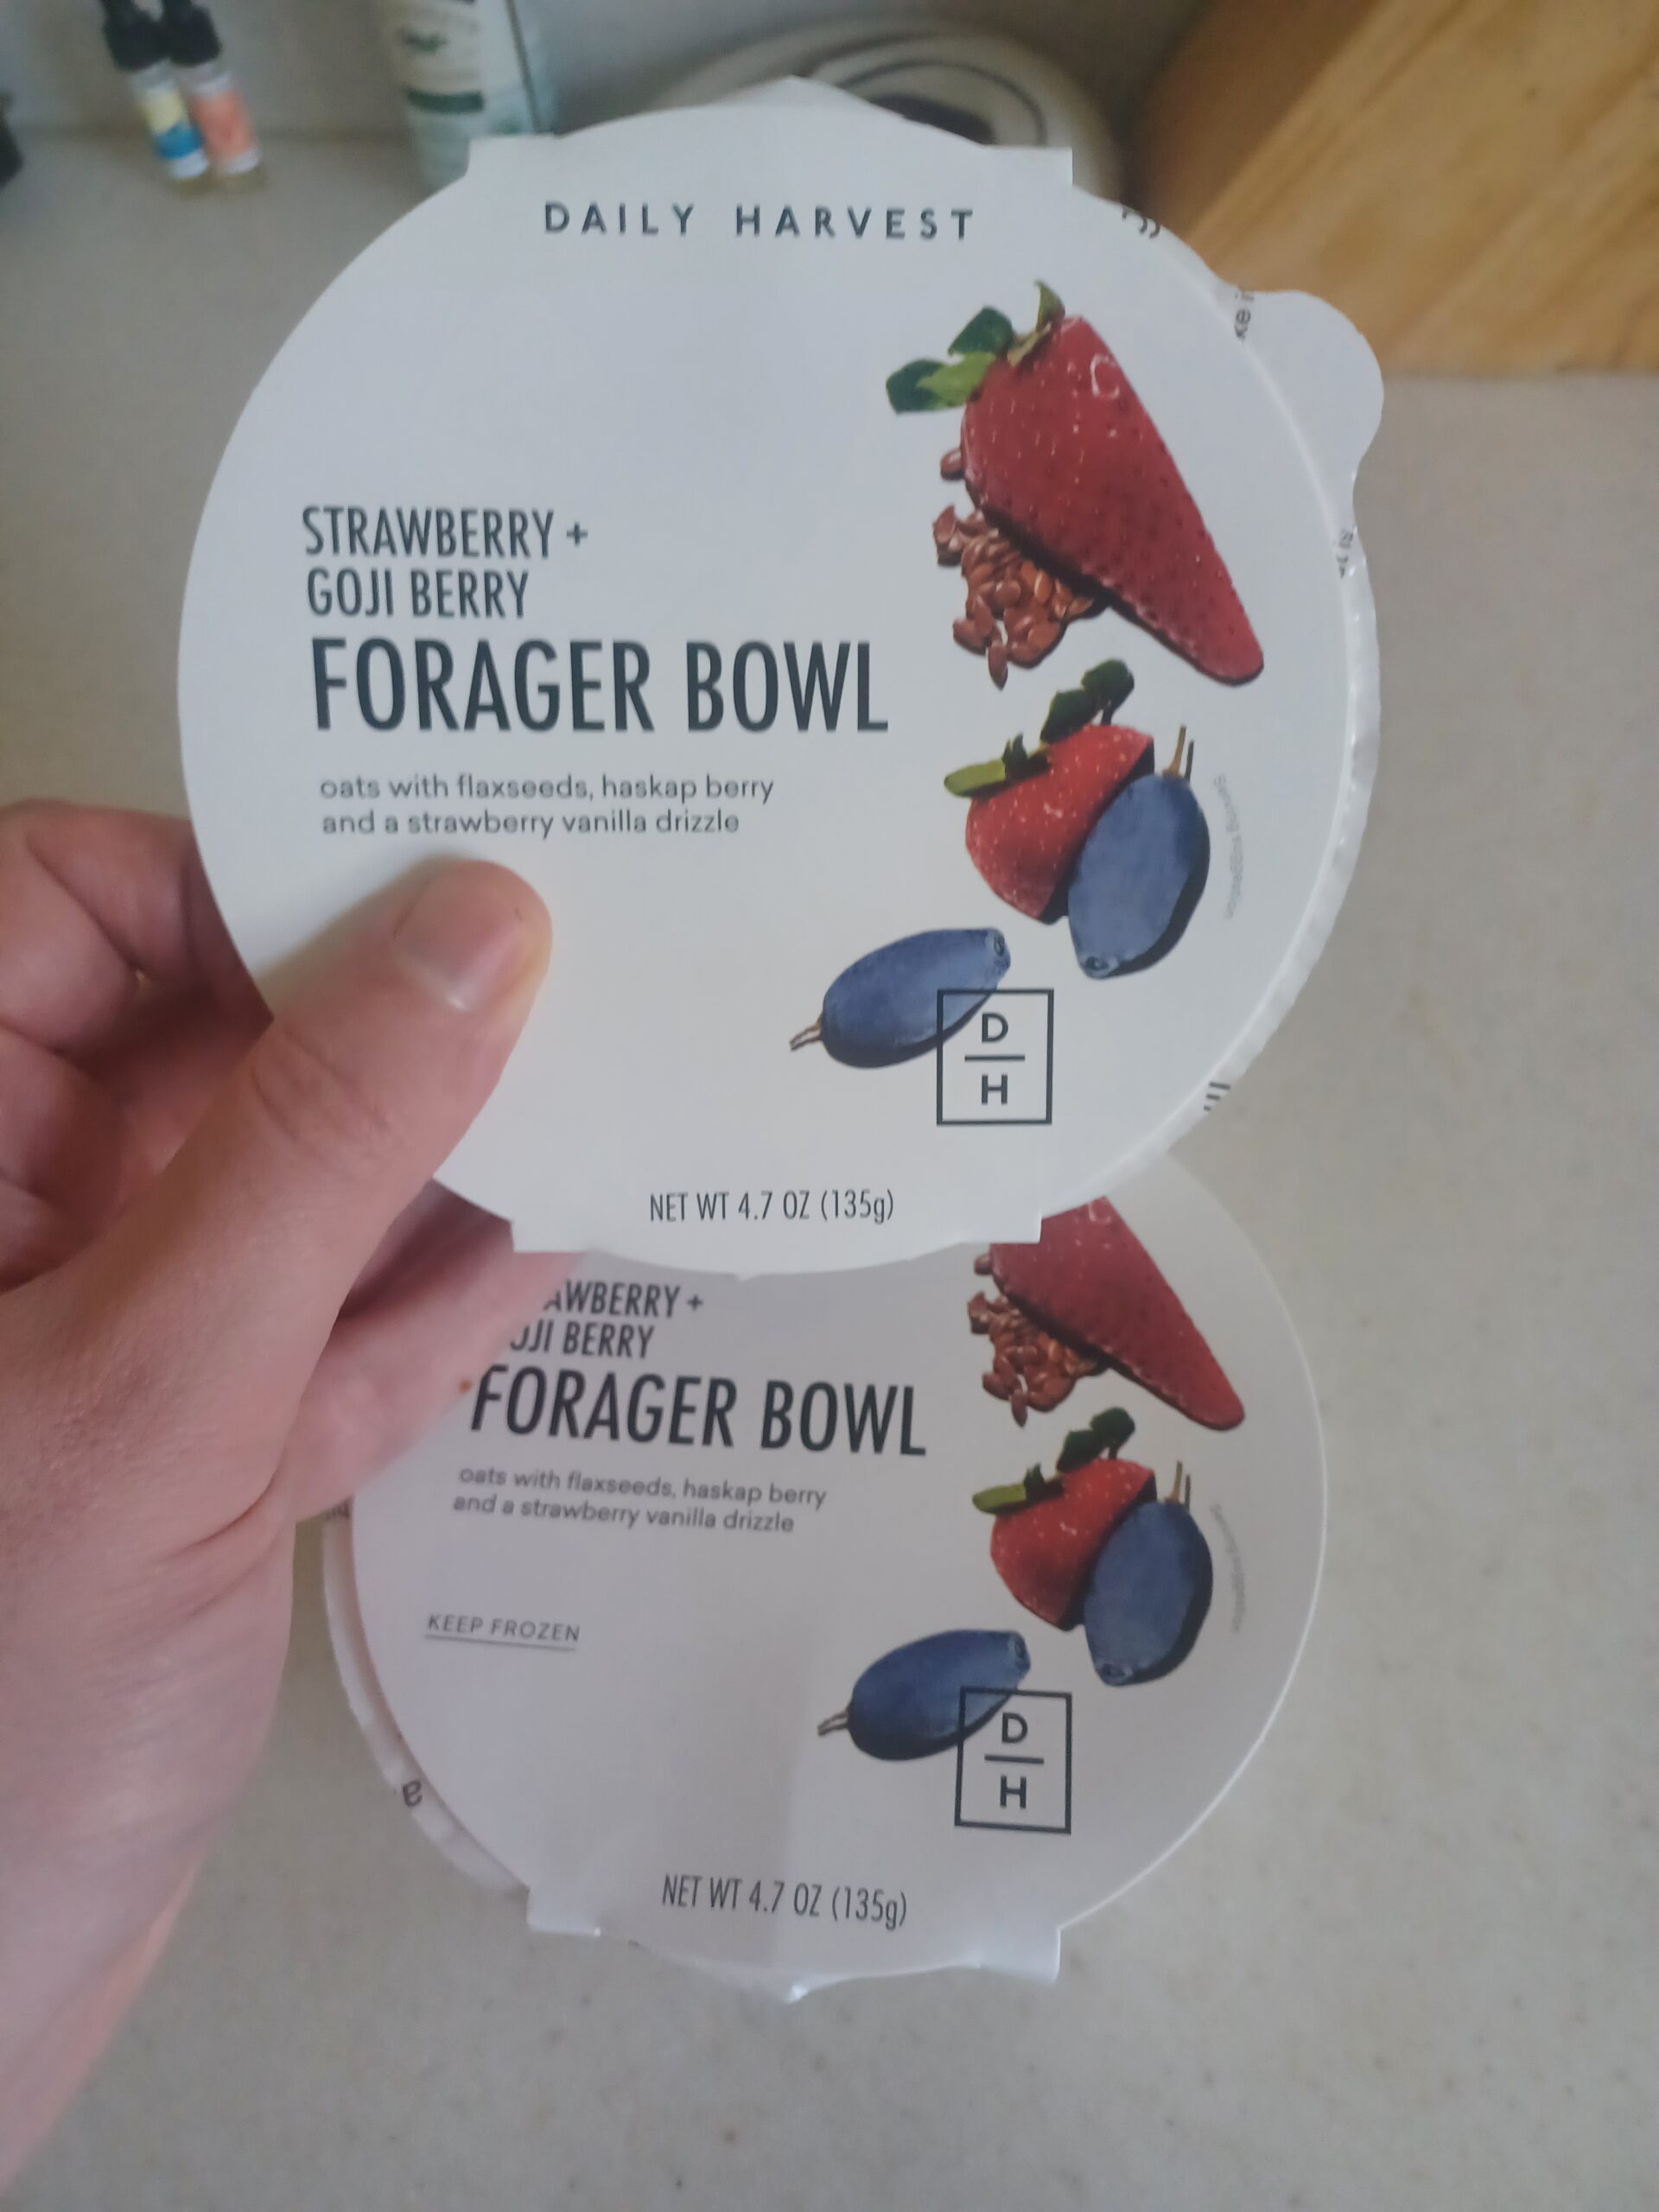 Daily Forager Bowl from Daily Harvest. 